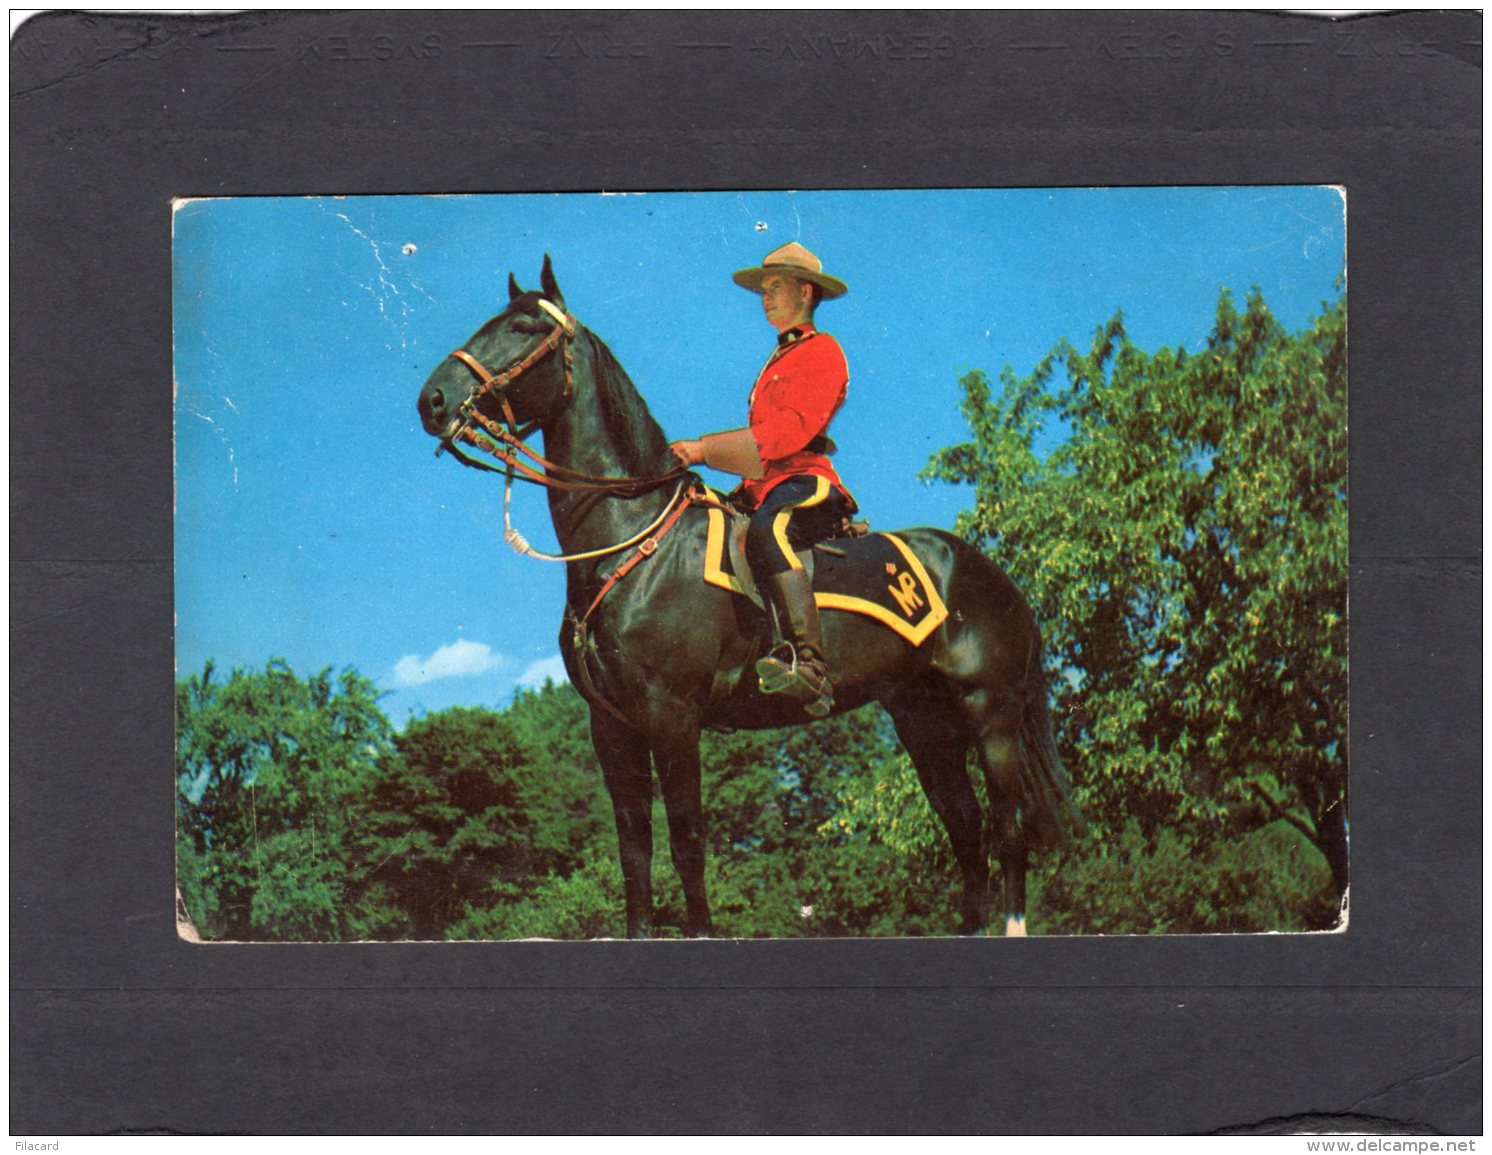 74386   Canada,   The Royal  Canadian Mounted Police In Canada,  VGSB  1958 - Windsor